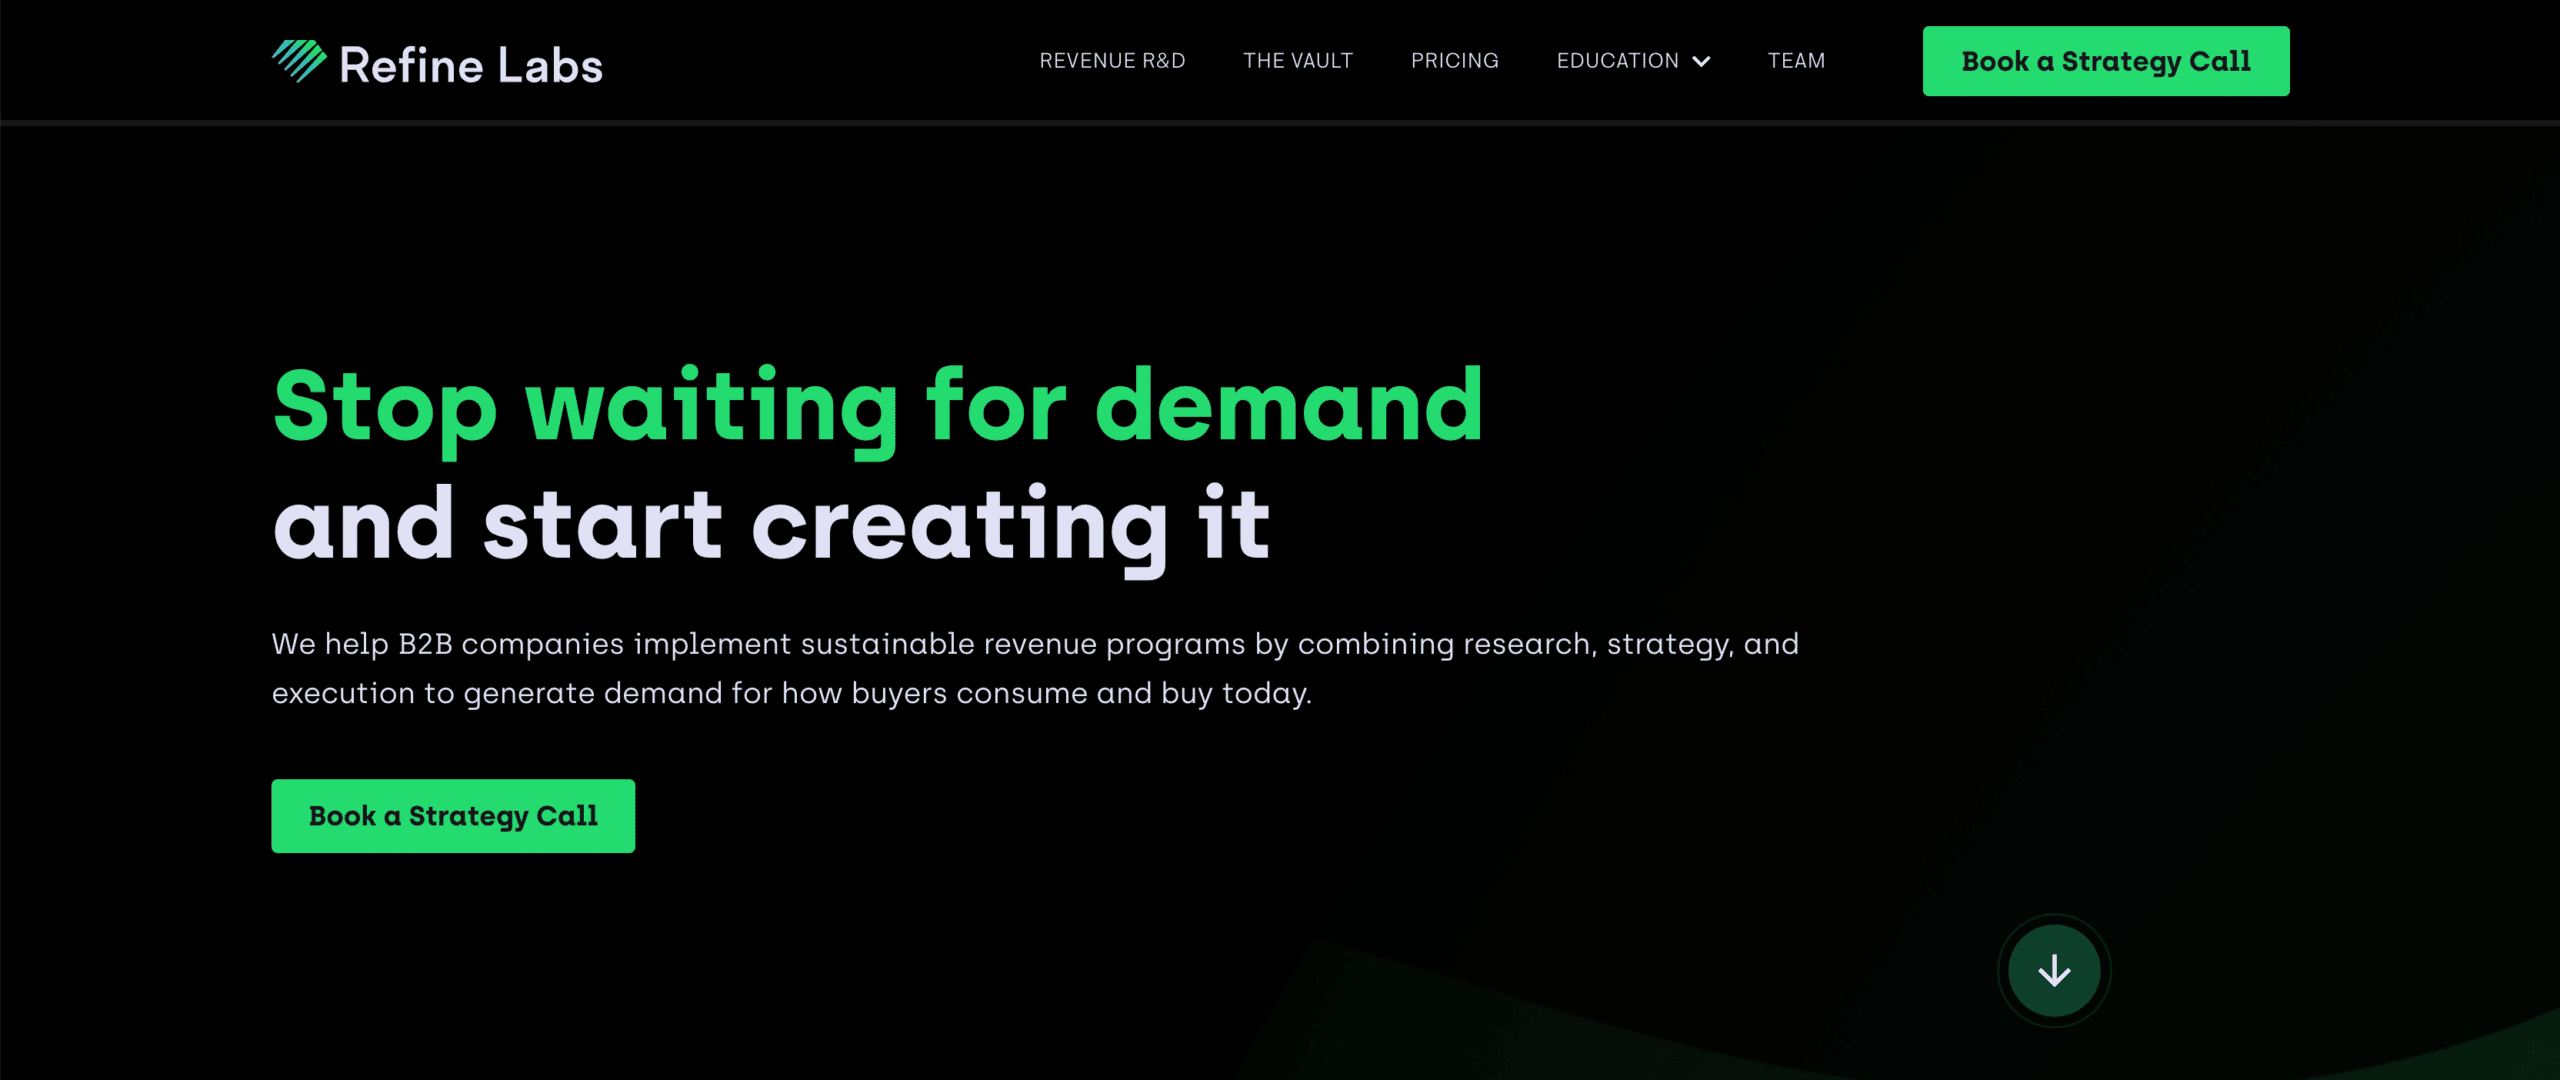 Refine labs home page